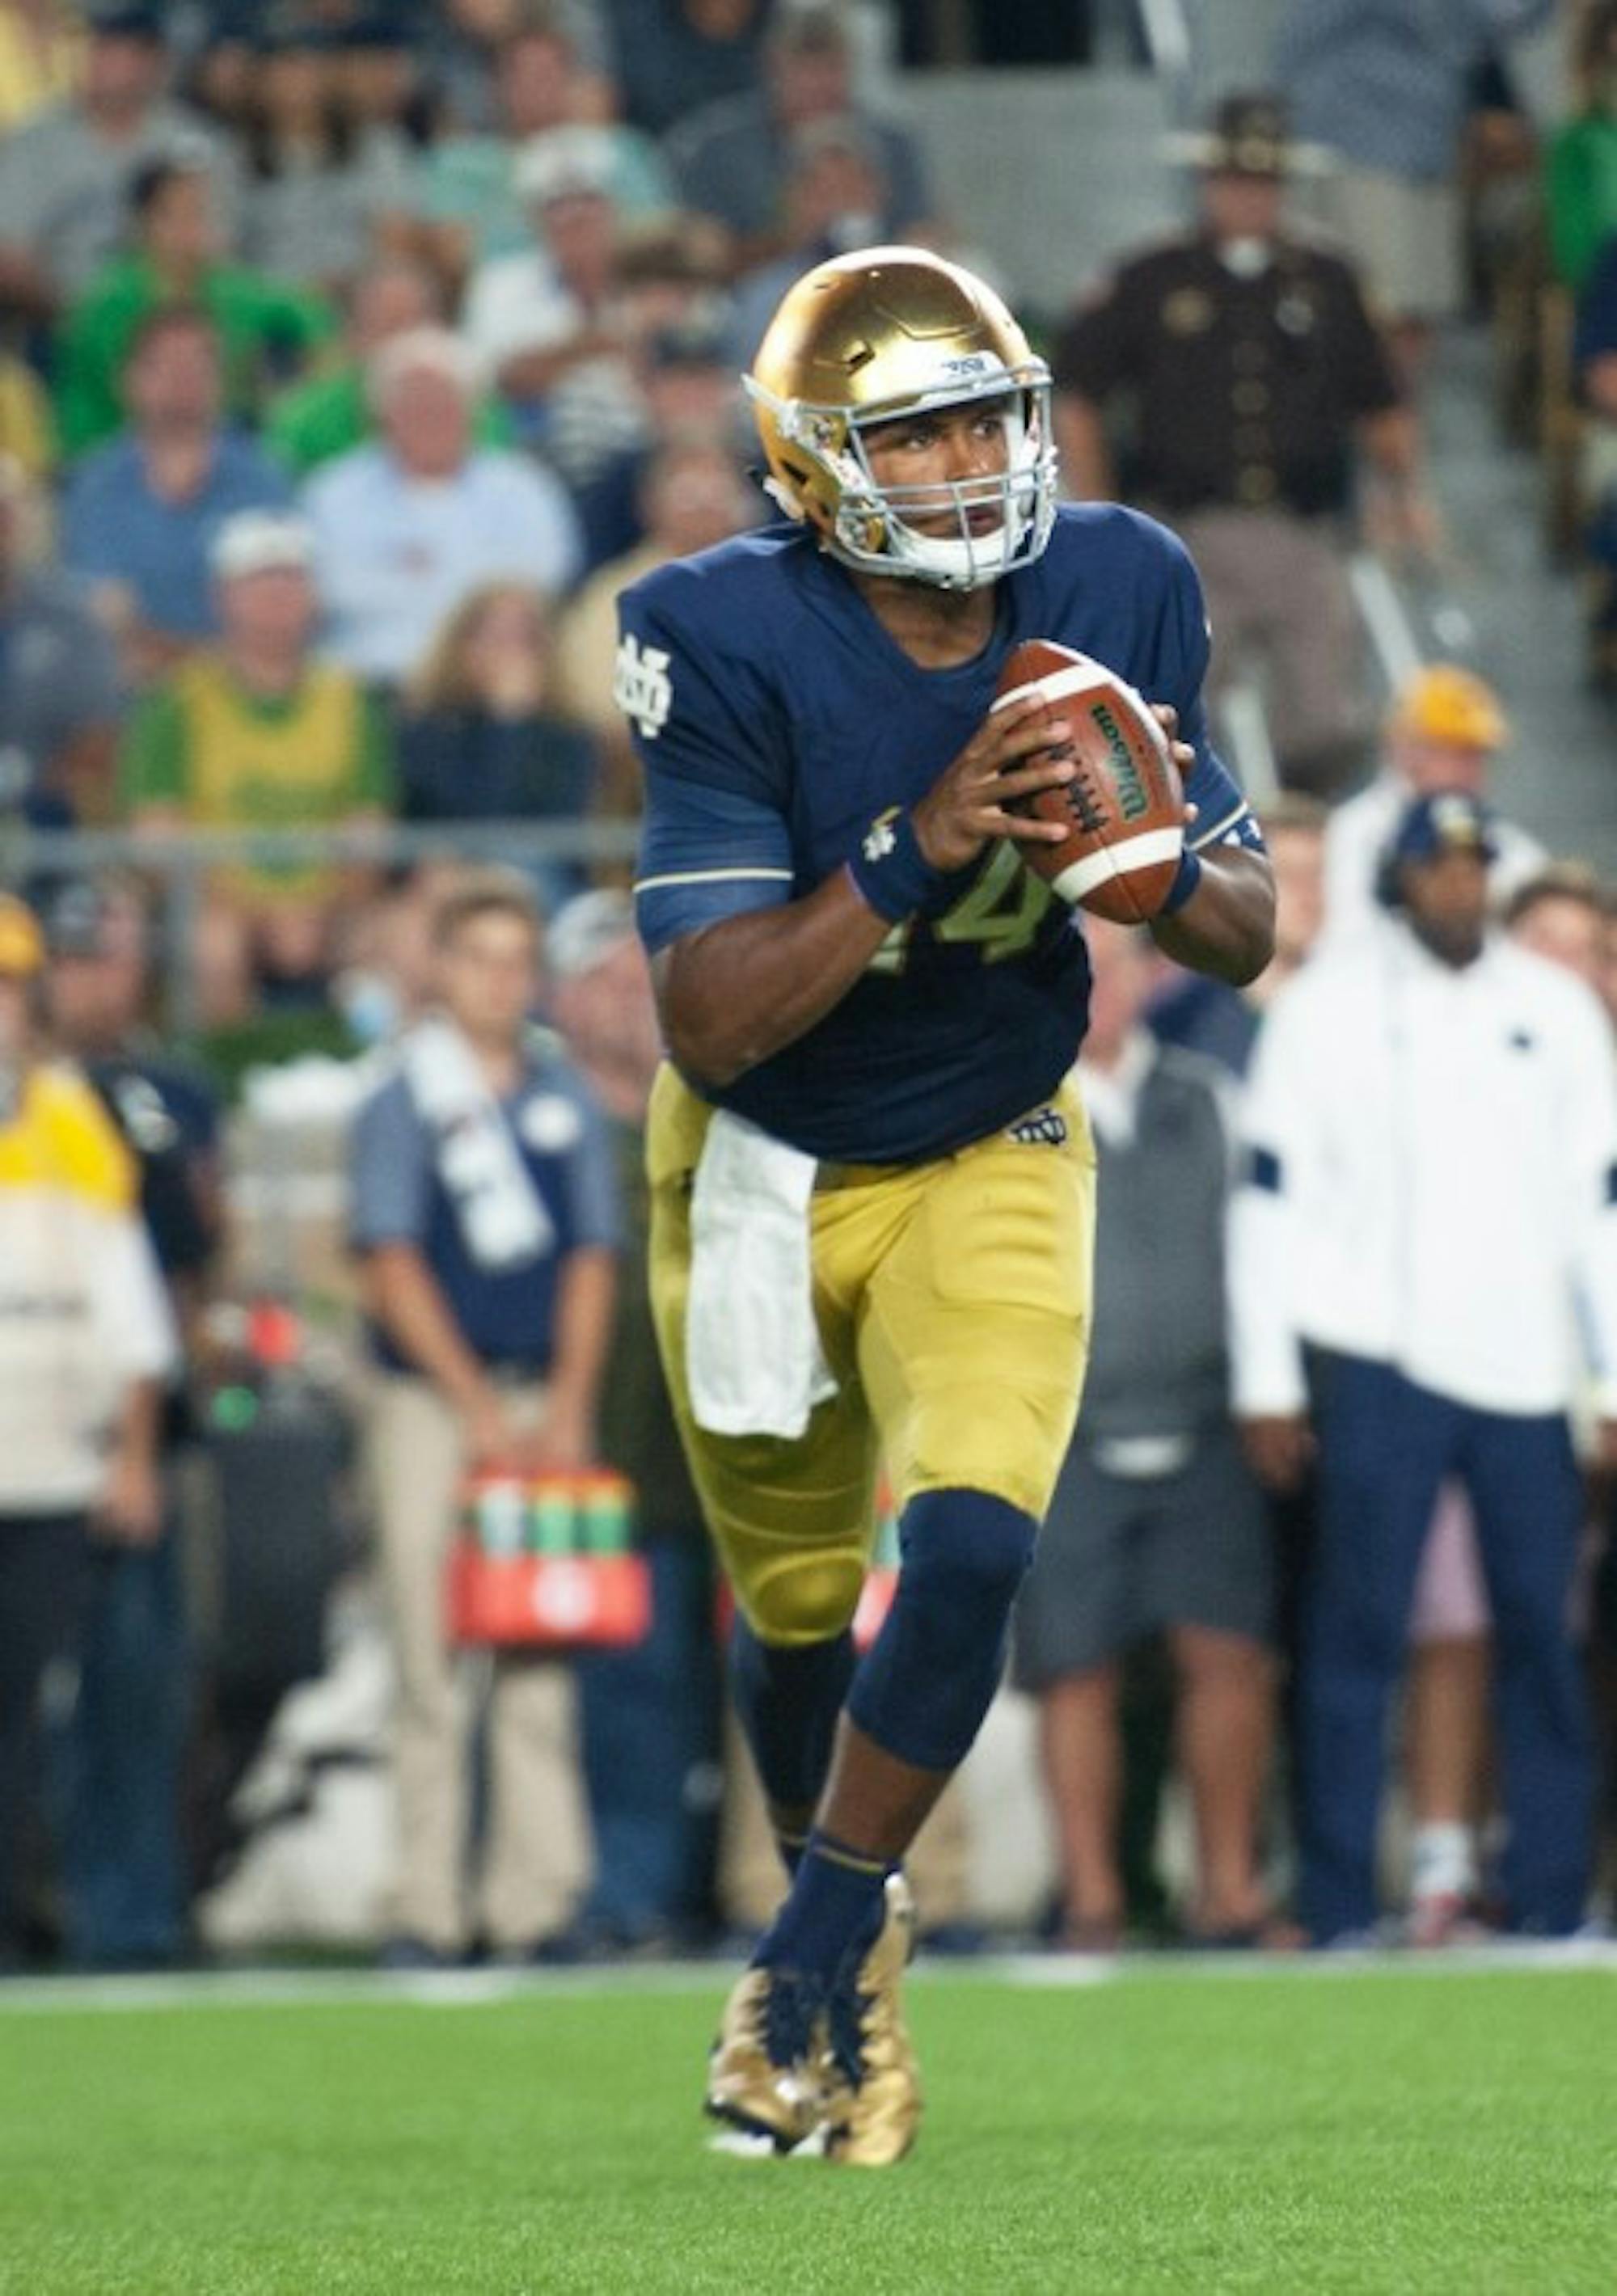 Irish junior quarterback DeShone Kizer rolls out for a pass during Notre Dame’s 36-28 loss against Michigan State on Saturday.